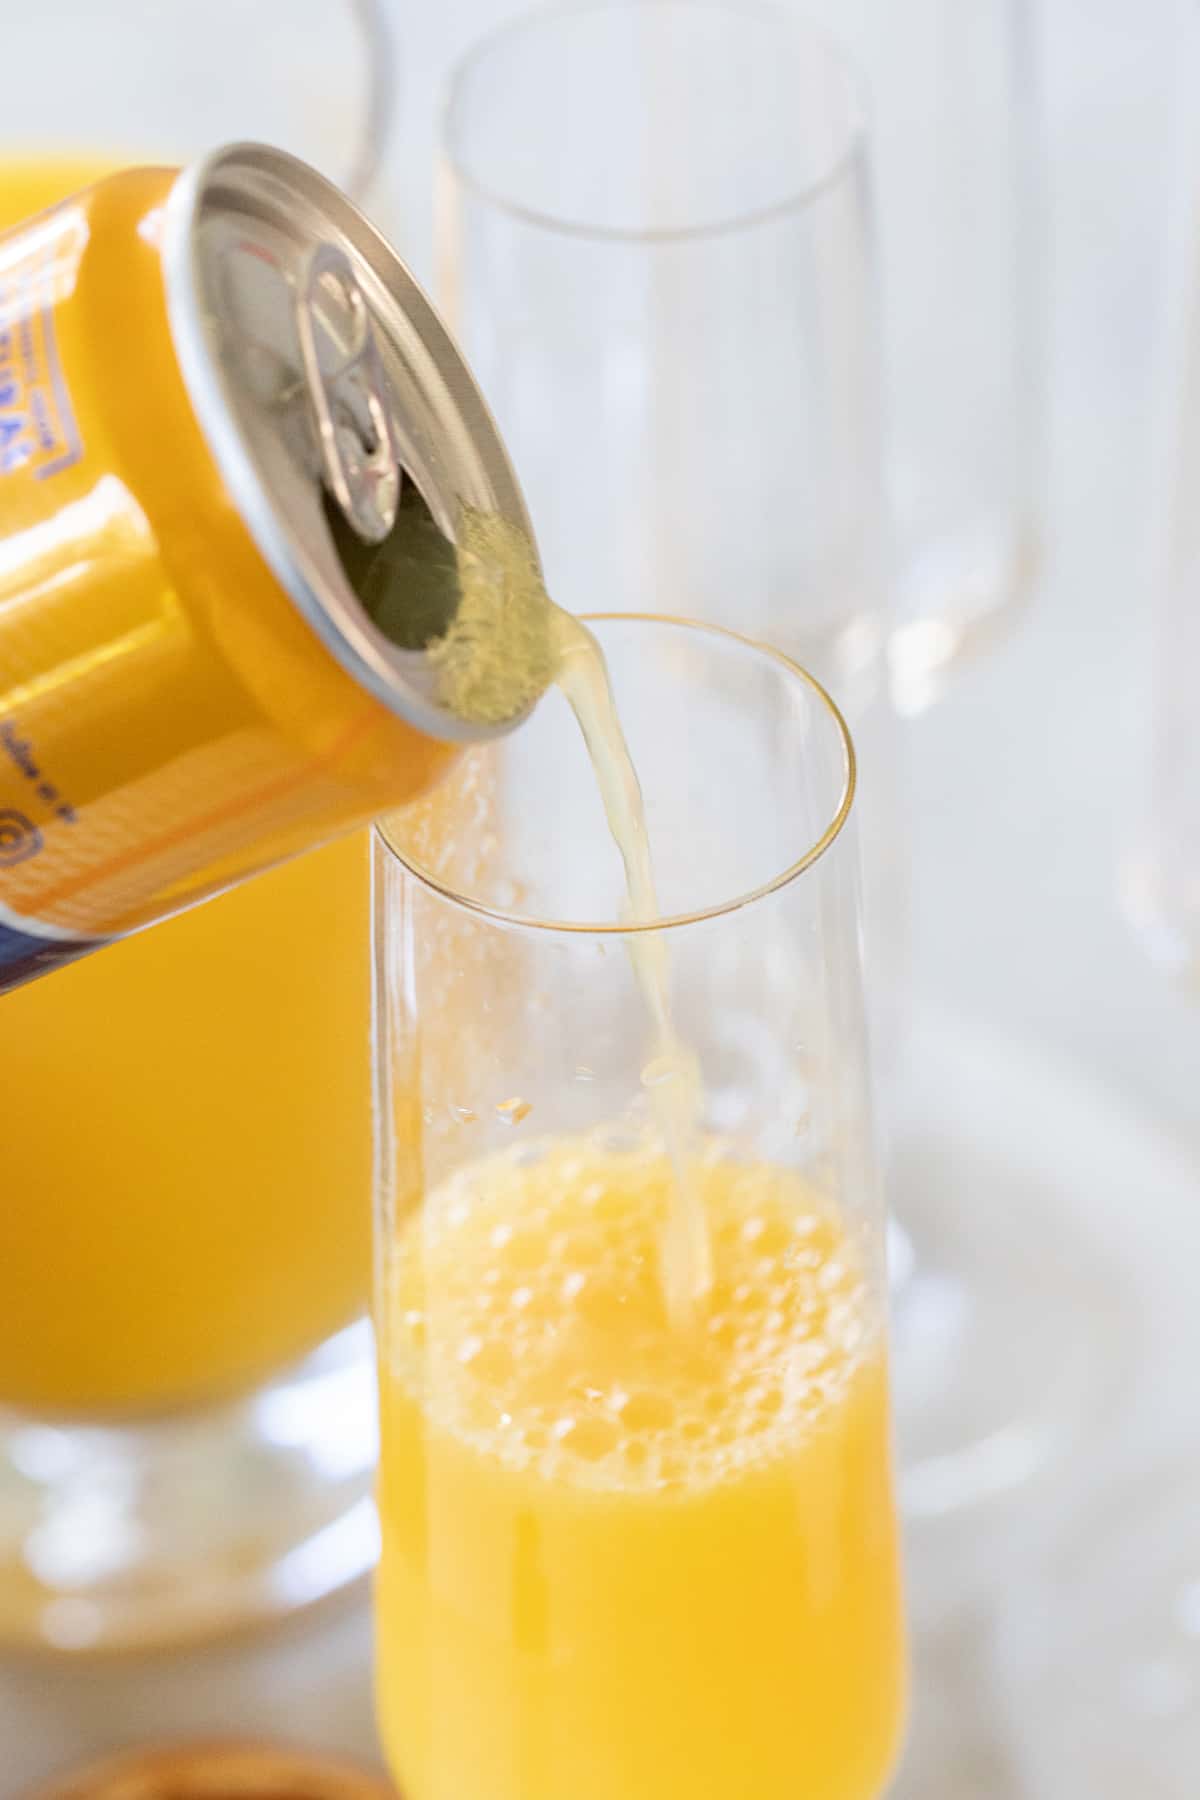 pouring an orange beverage into a Champagne flute